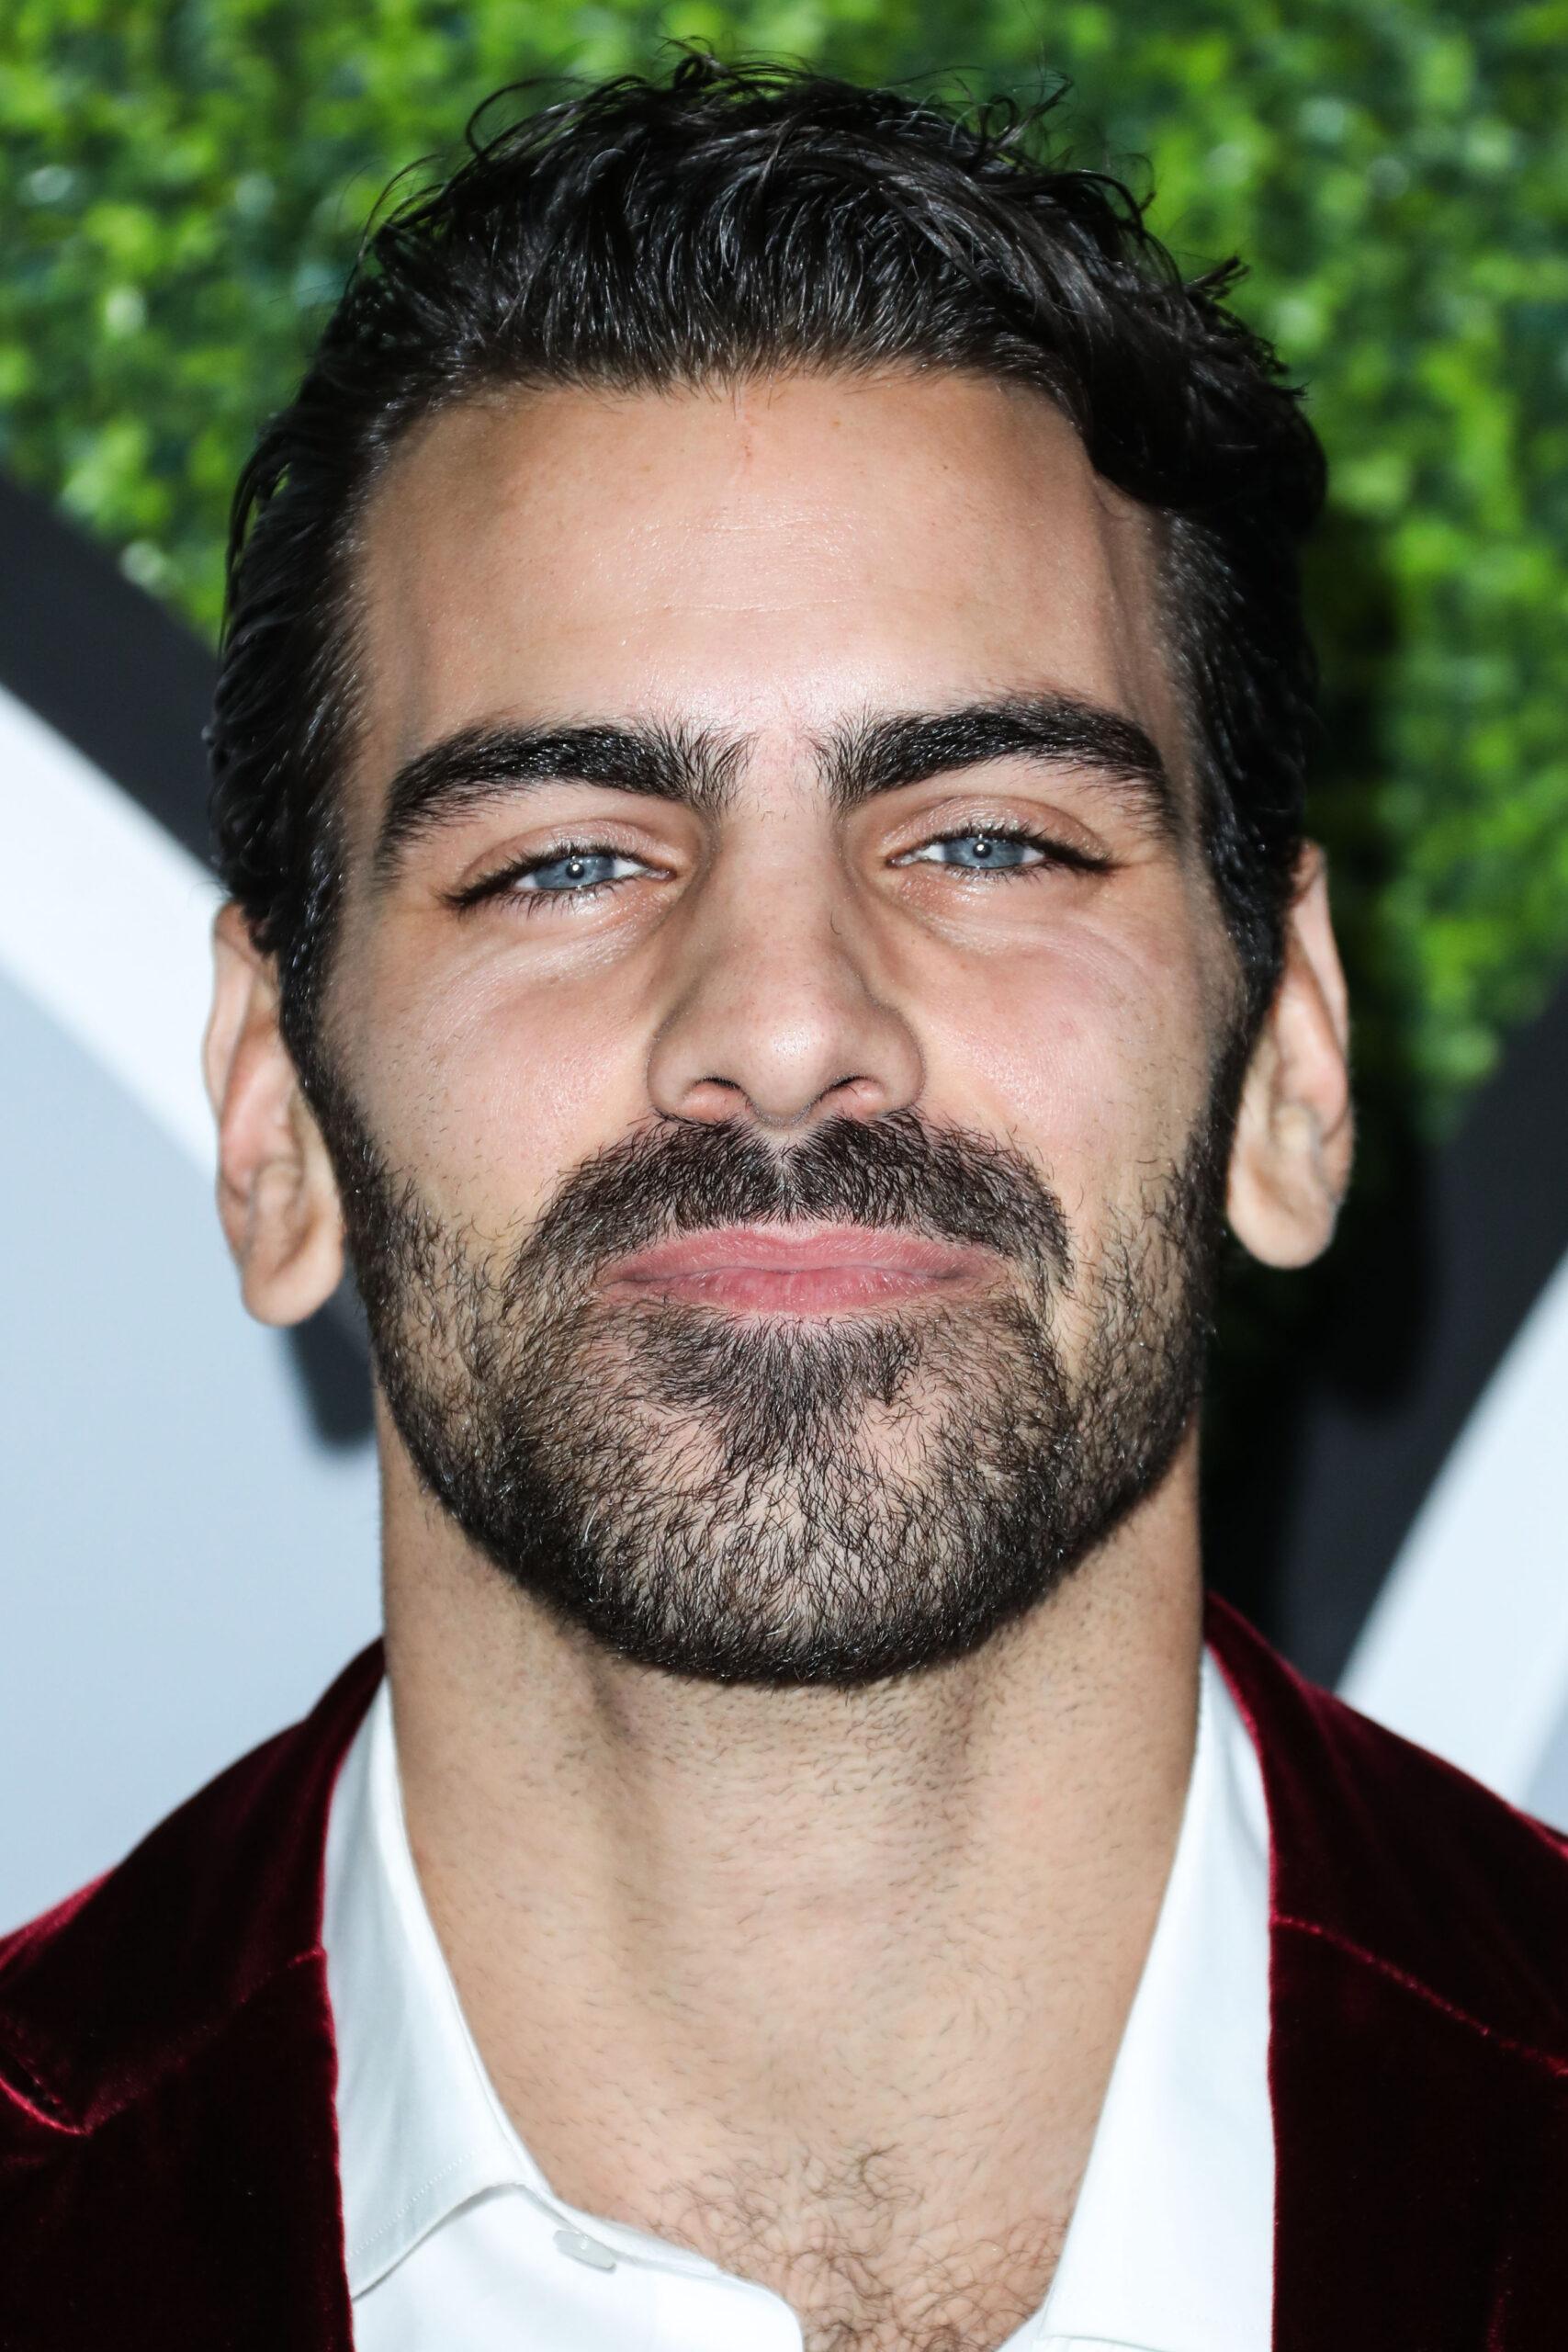 (FILE) Nyle DiMarco Says He 'Likely Contracted Coronavirus COVID-19' But Will Skip Testing to Help Others